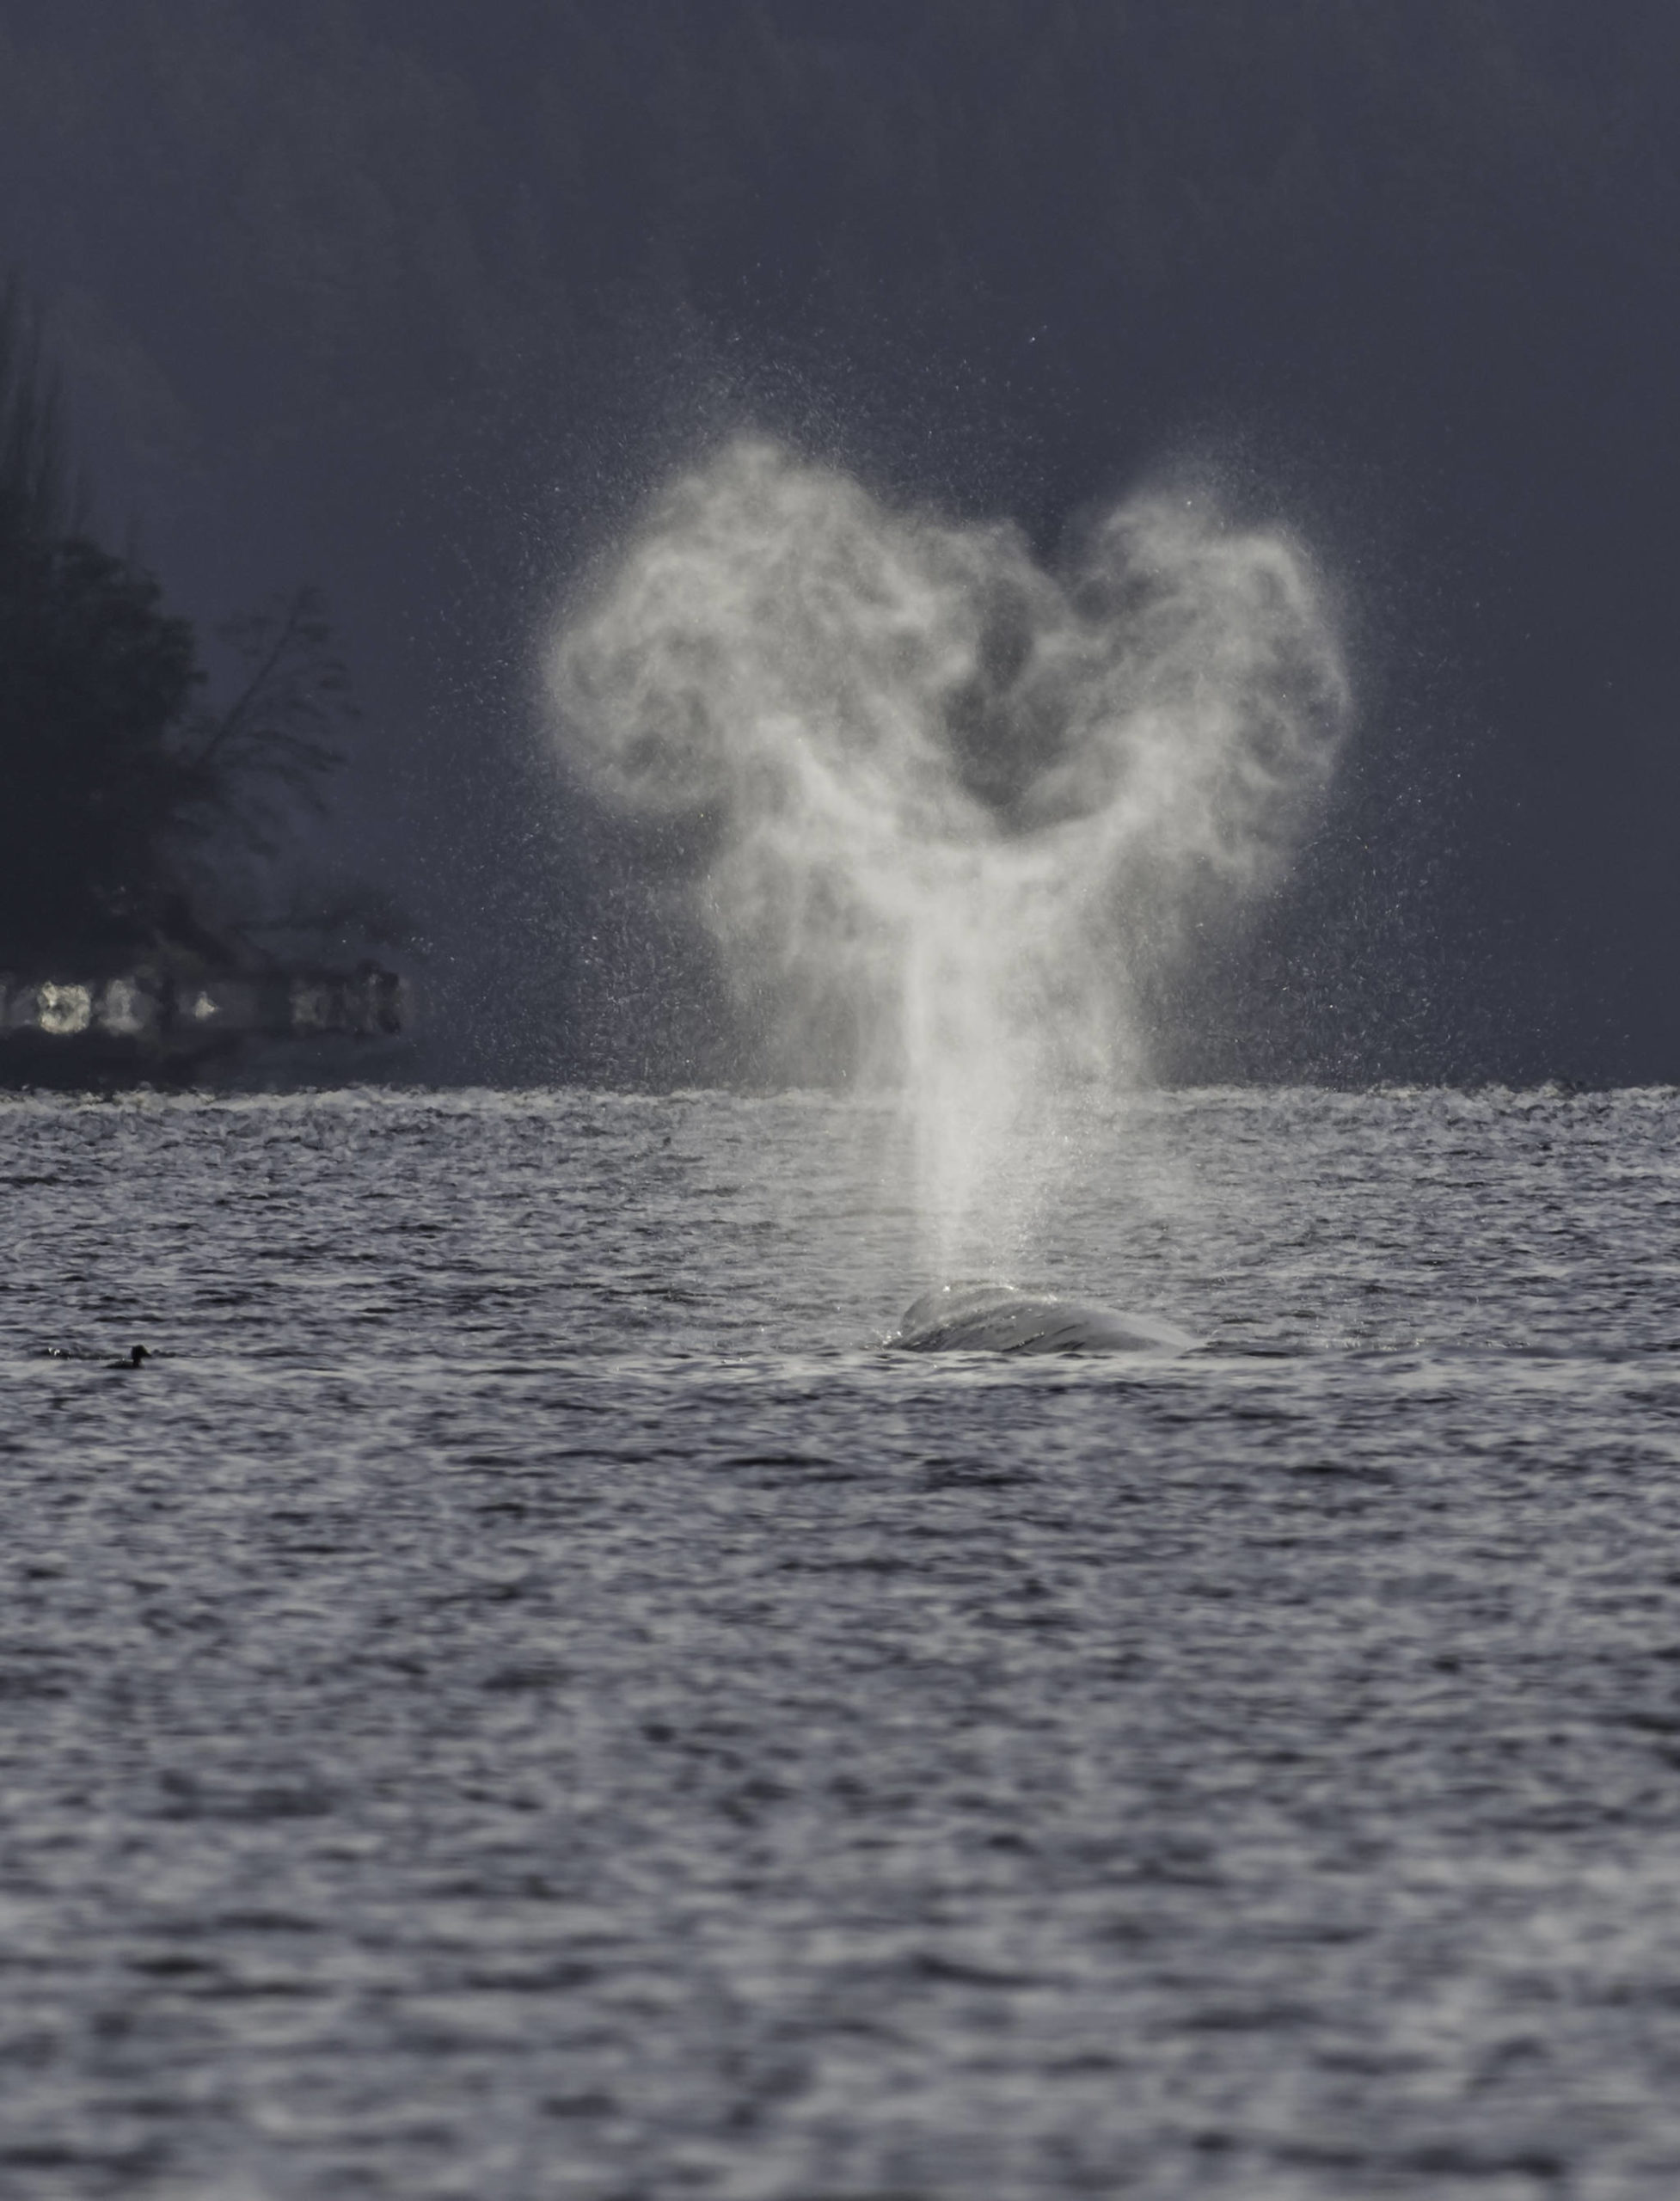 Photo by Bob VonDrachek
One photographer spotted a gray whale the morning of March 8 from the public parking lot at Hidden Beach in Greenbank.